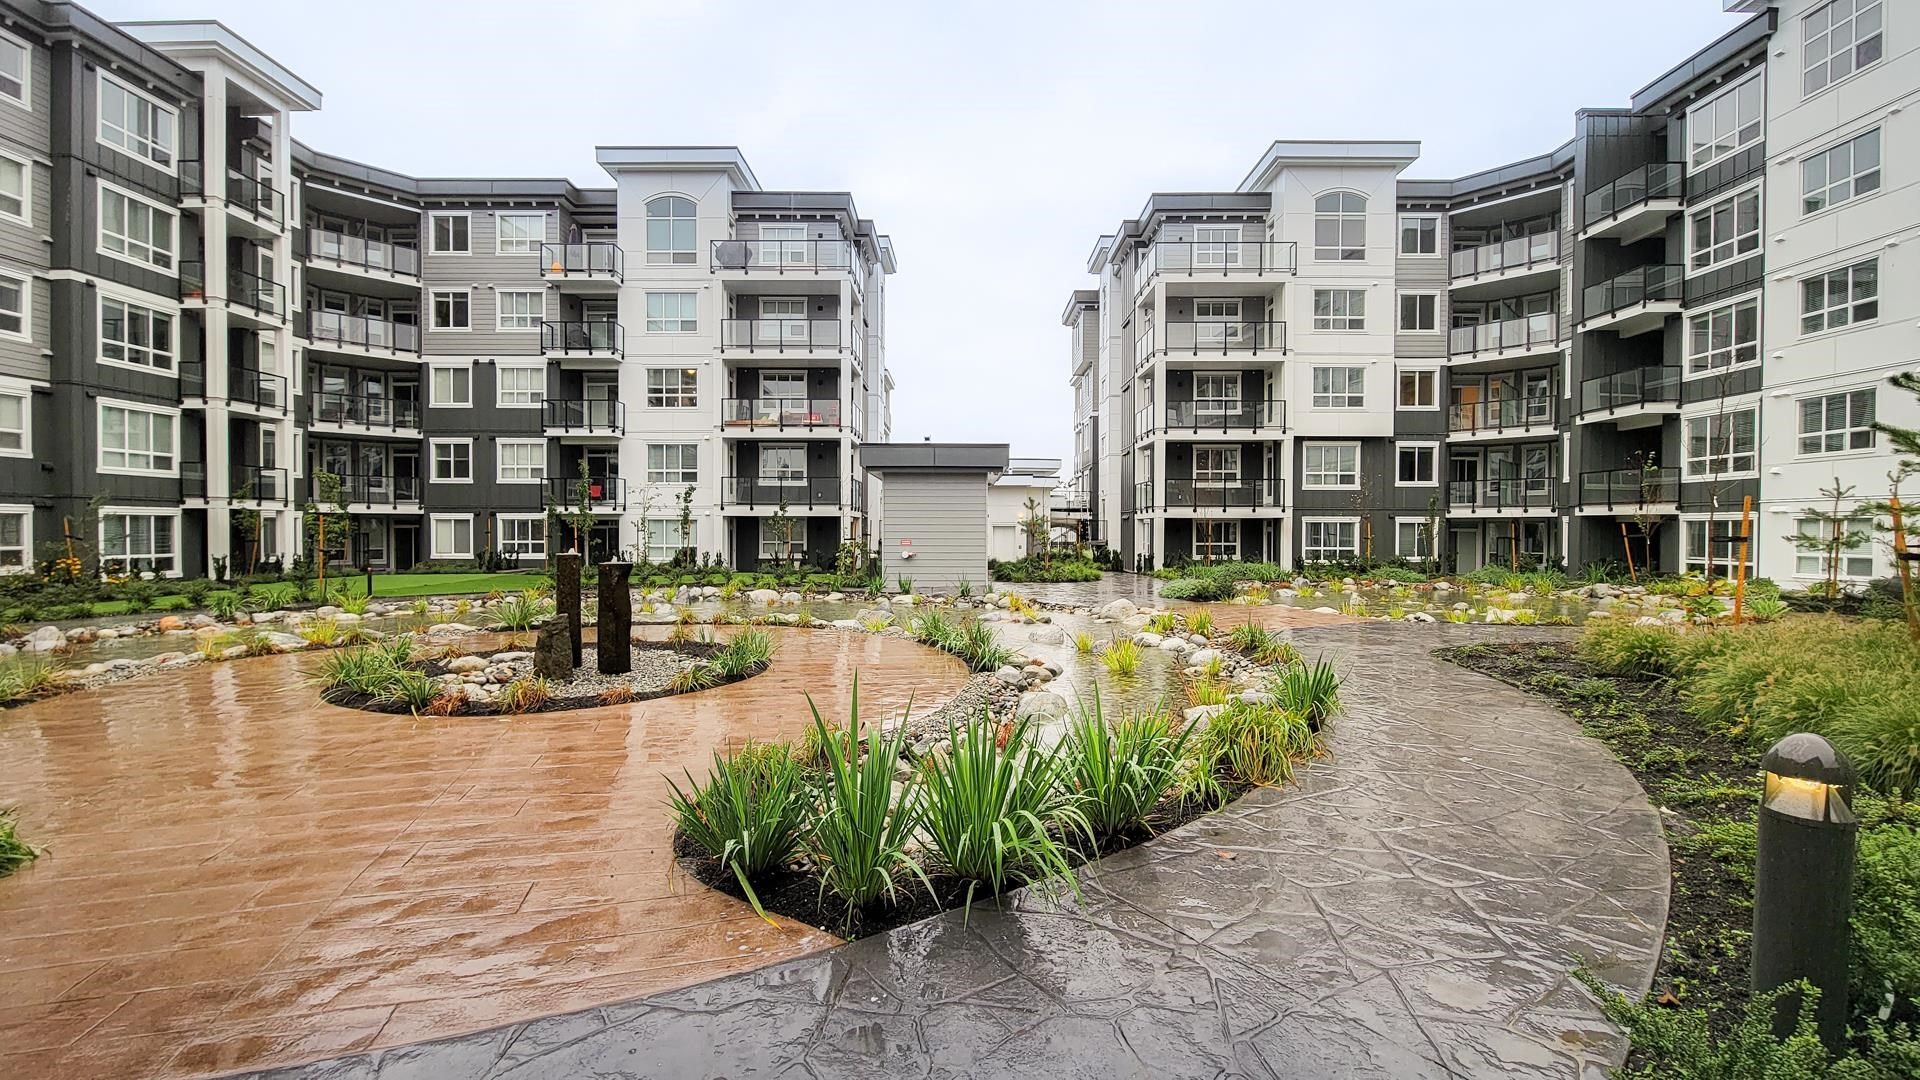 Photo 17: Photos: 422 2180 KELLY AVENUE in Port Coquitlam: Central Pt Coquitlam Condo for sale : MLS®# R2629524